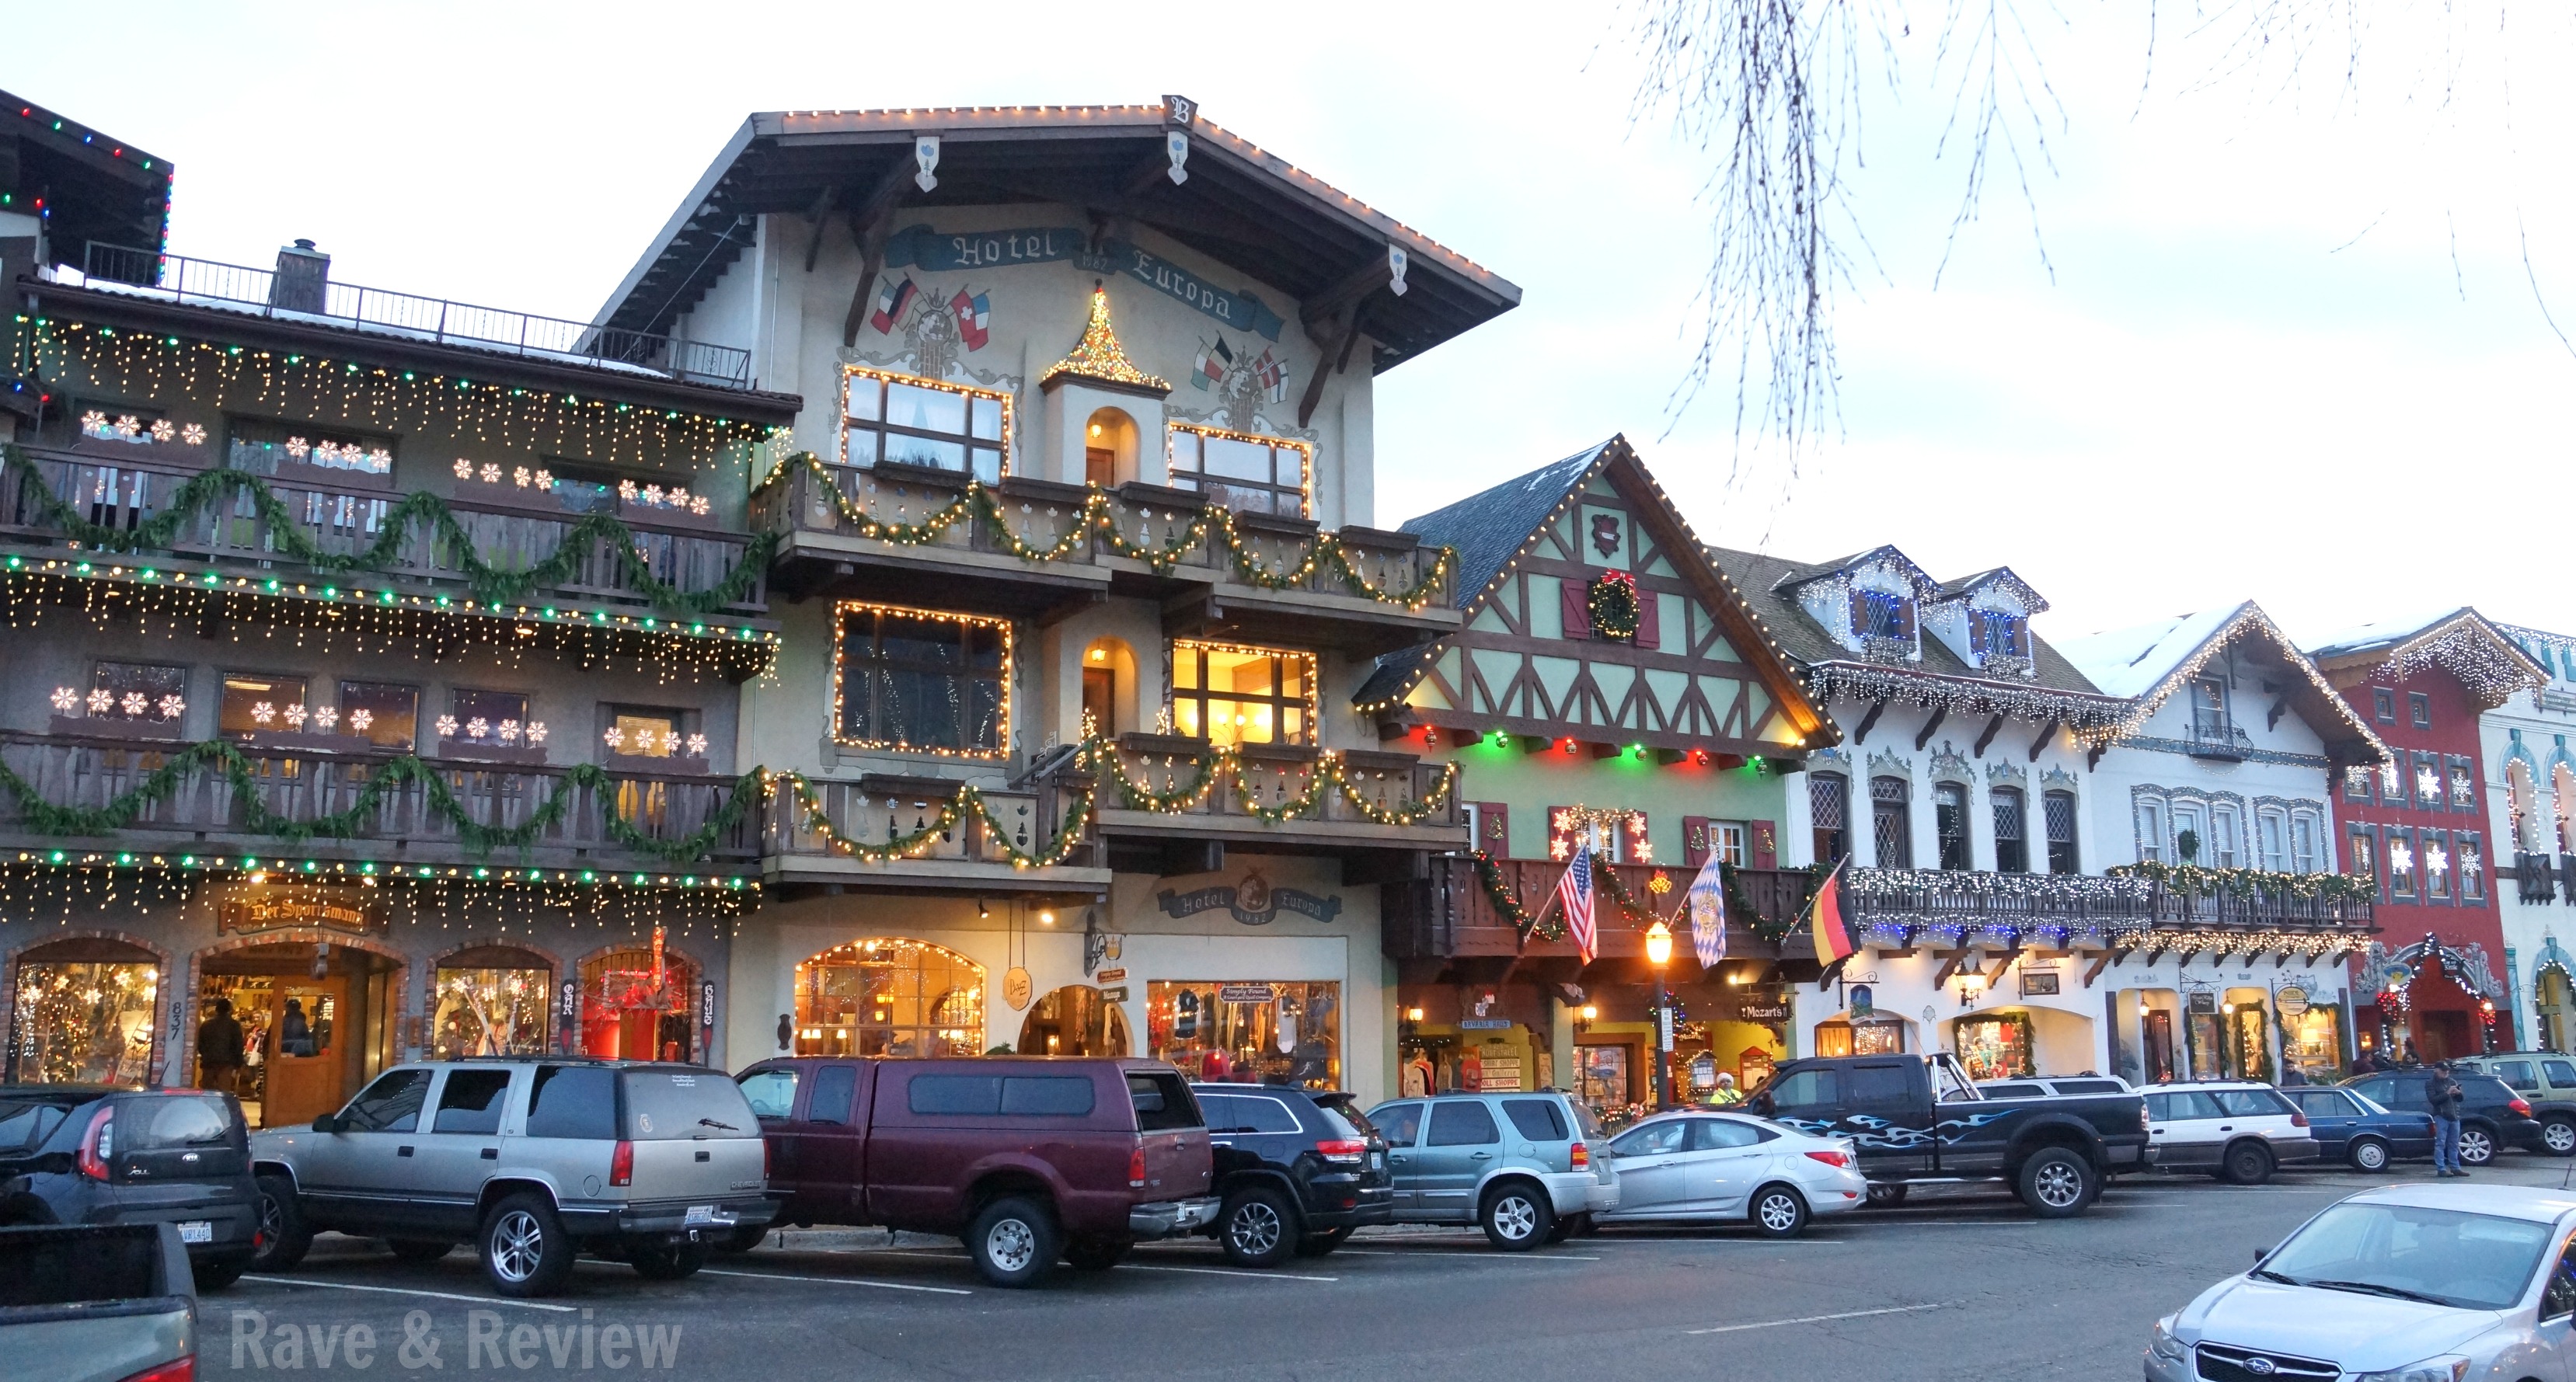 Travel 12 reasons to visit Leavenworth, WA in winter {+ 3 things to